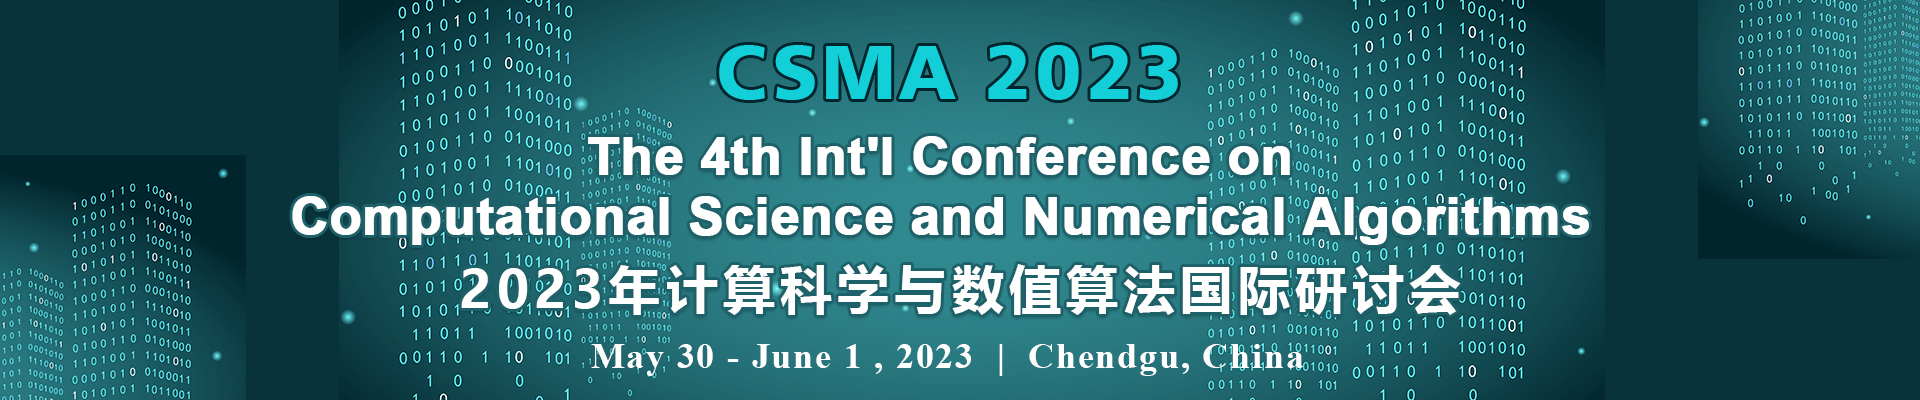 The 4th Int'l Conference on Computational Science and Numerical Algorithms (CSMA 2023), Chengdu, Sichuan, China